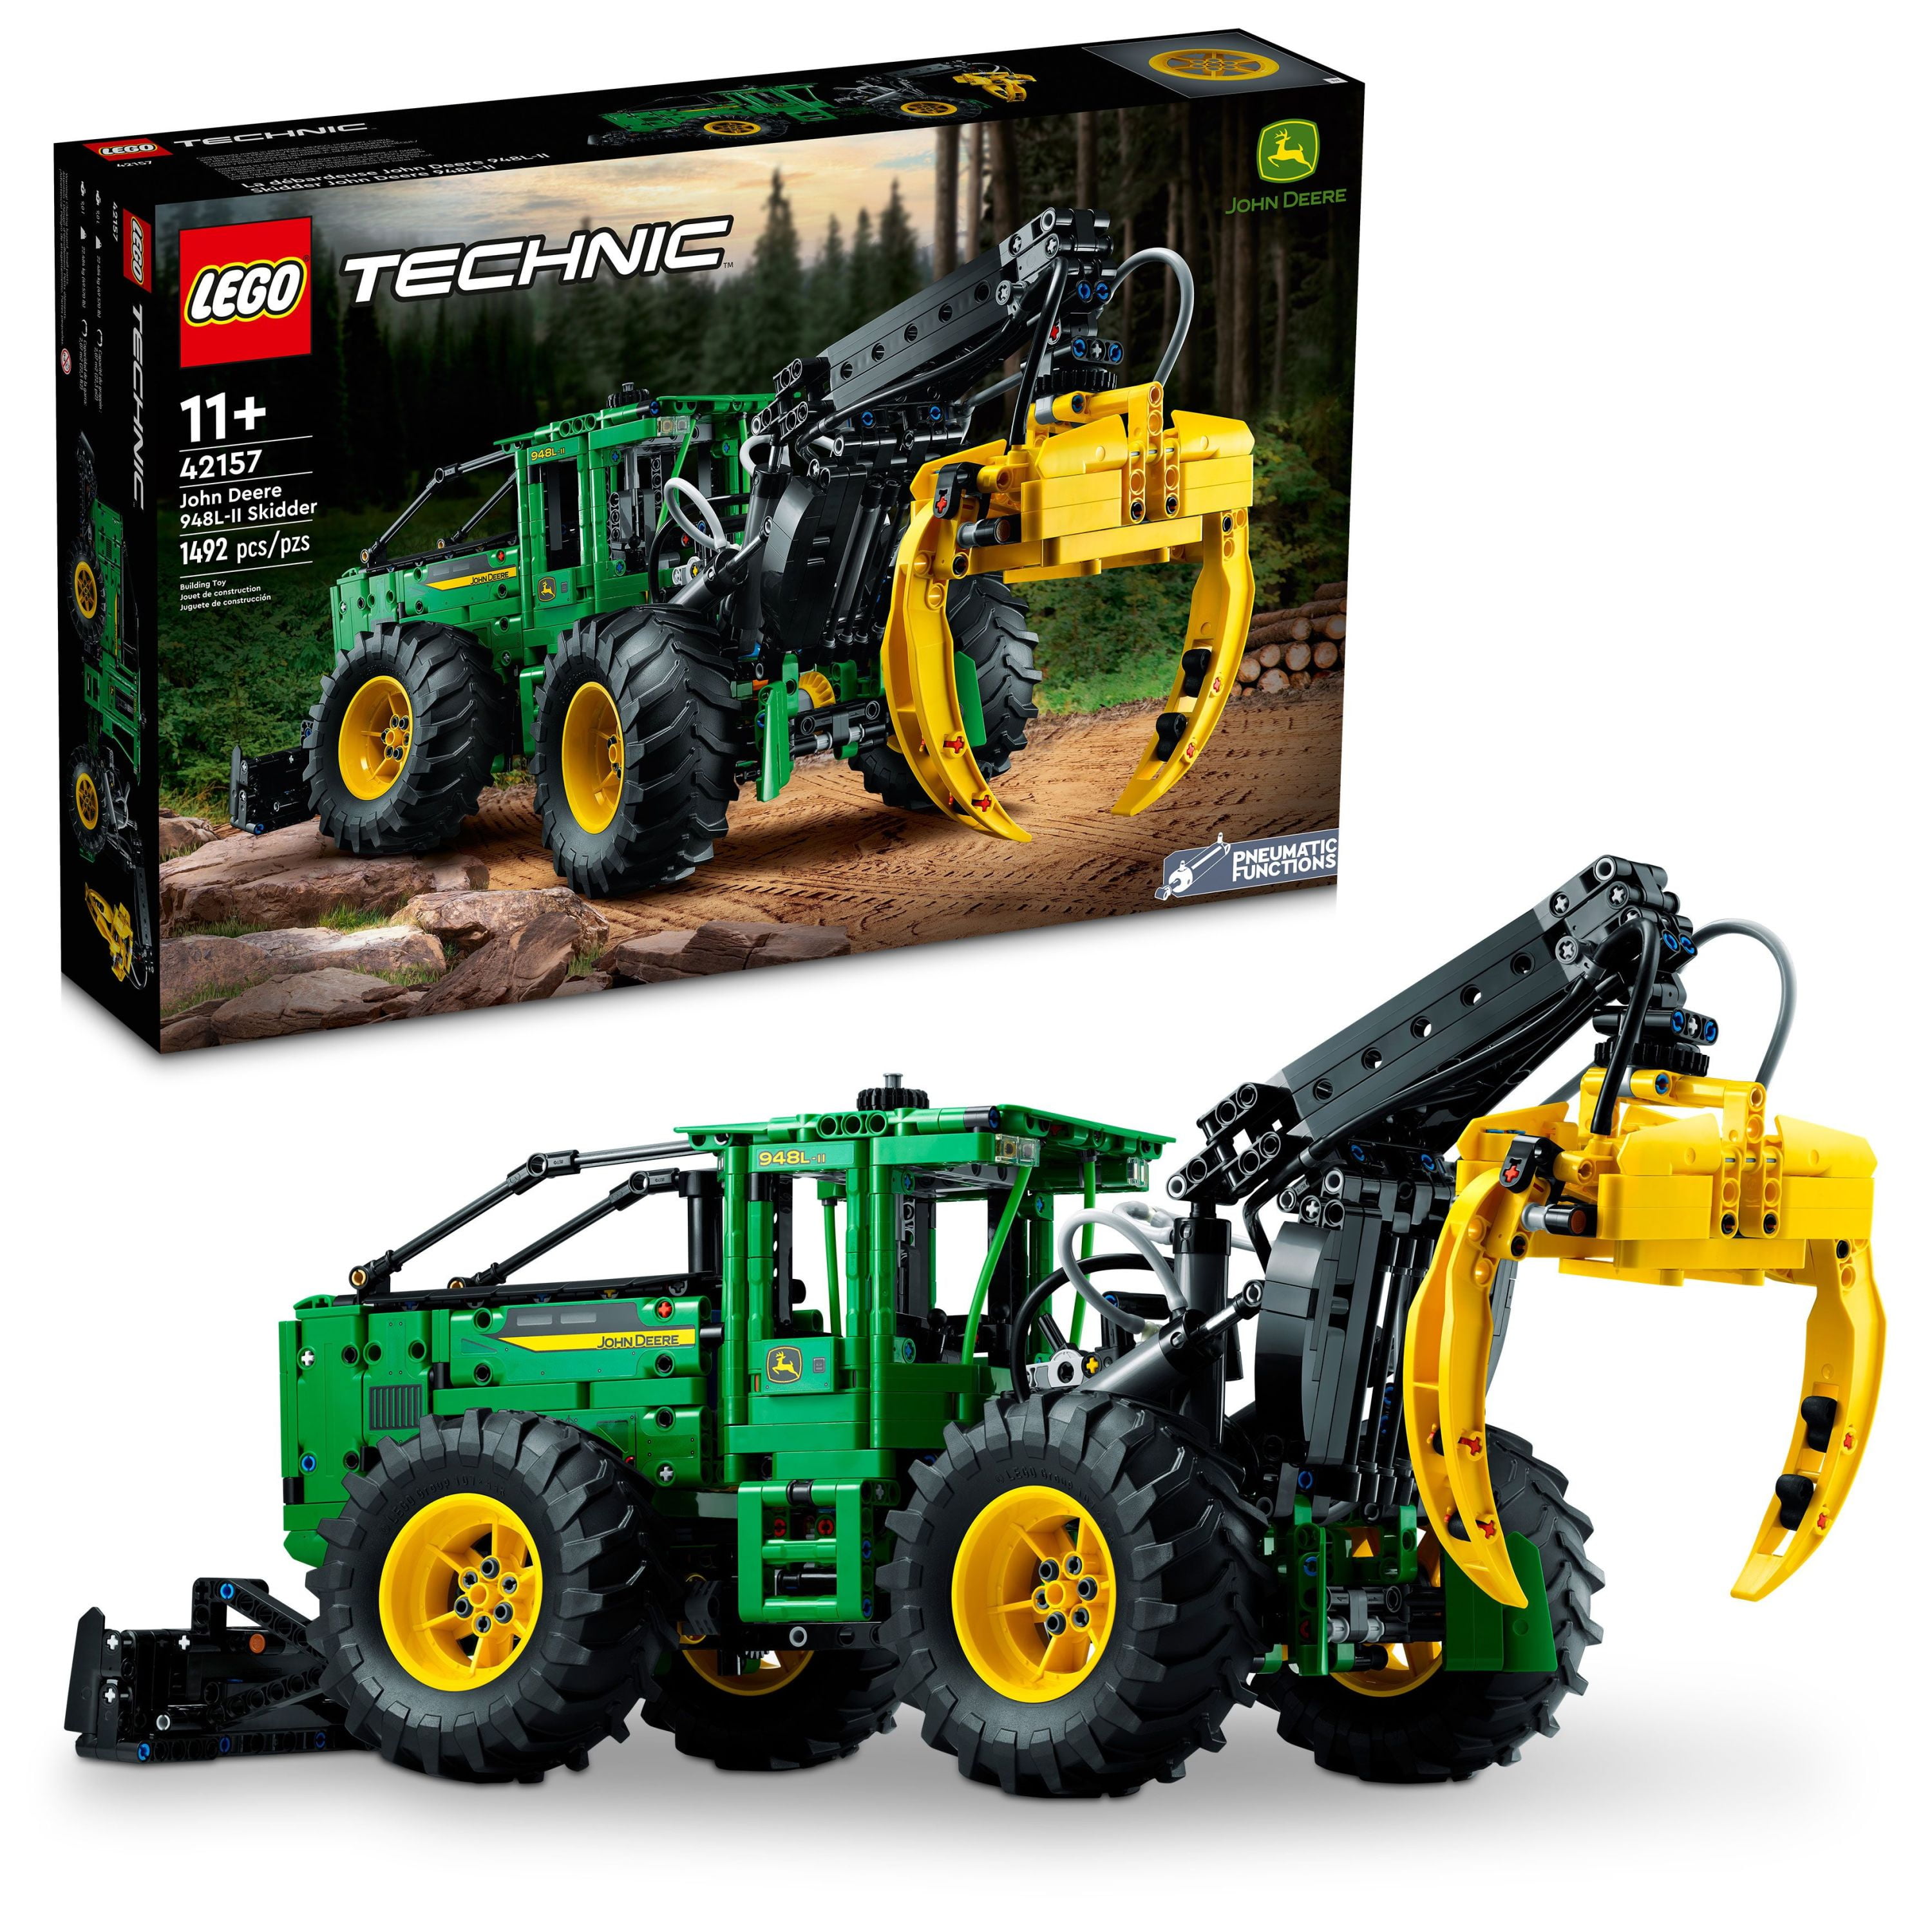 LEGO Technic John Deere 9620R 4WD Tractor Toy 42136 Building Toy -  Collectible Model with Trailer, Featuring Realistic Details, Construction  Farm Toy